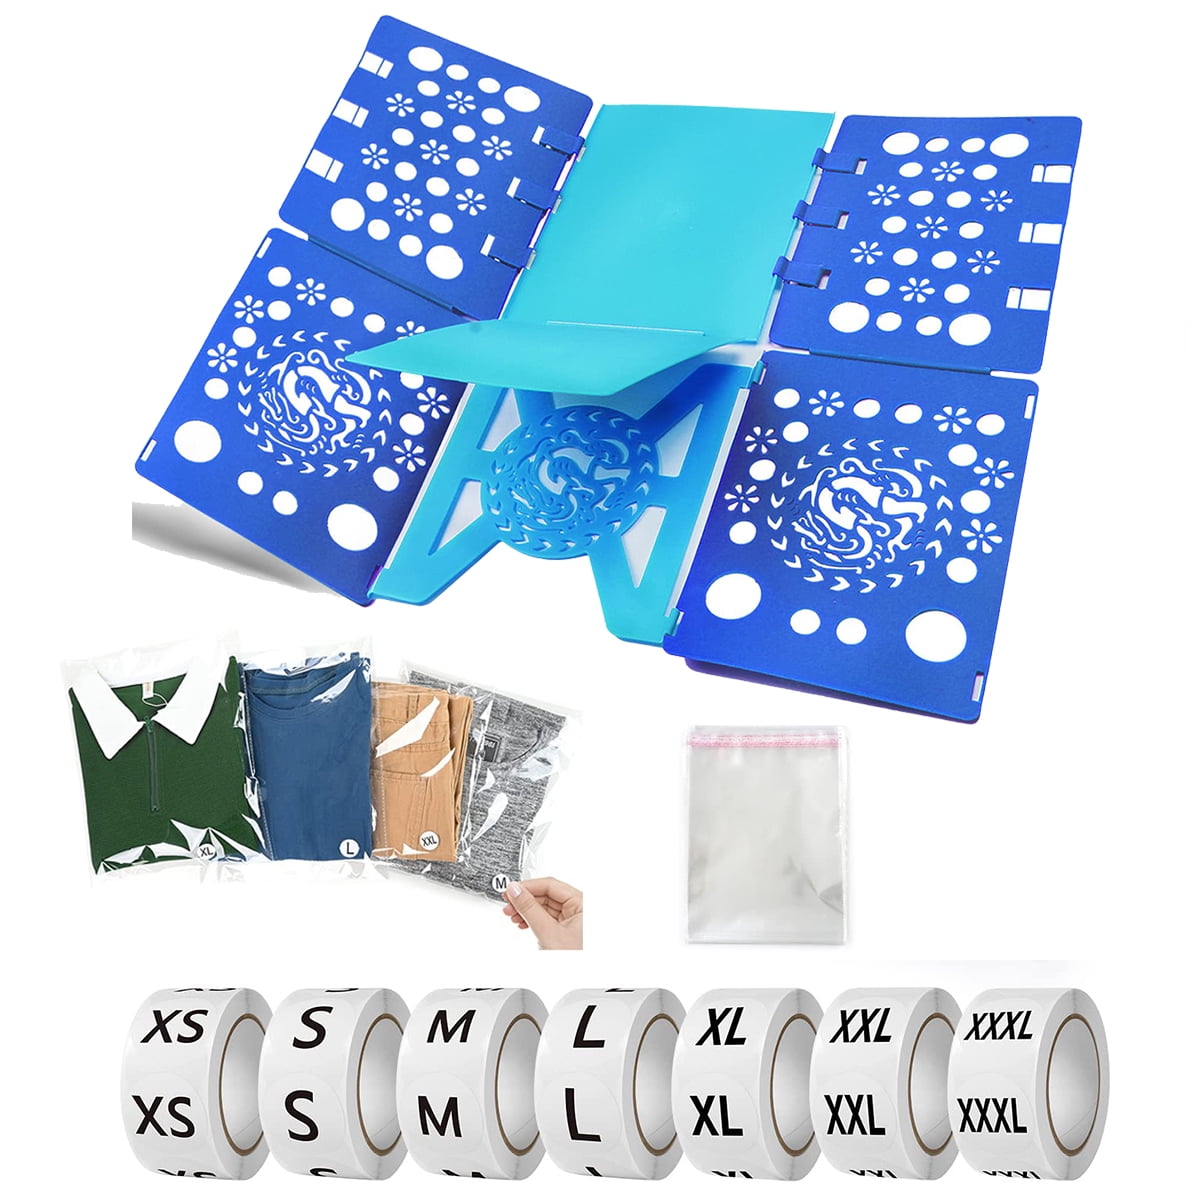 Immekey Shirt Folding Board with Shirt Bags 100 Pcs10x13 Inches with Clothing Size Stickers Labels 7 Sizes 3500 Pcs, for Adults and Children Shirt